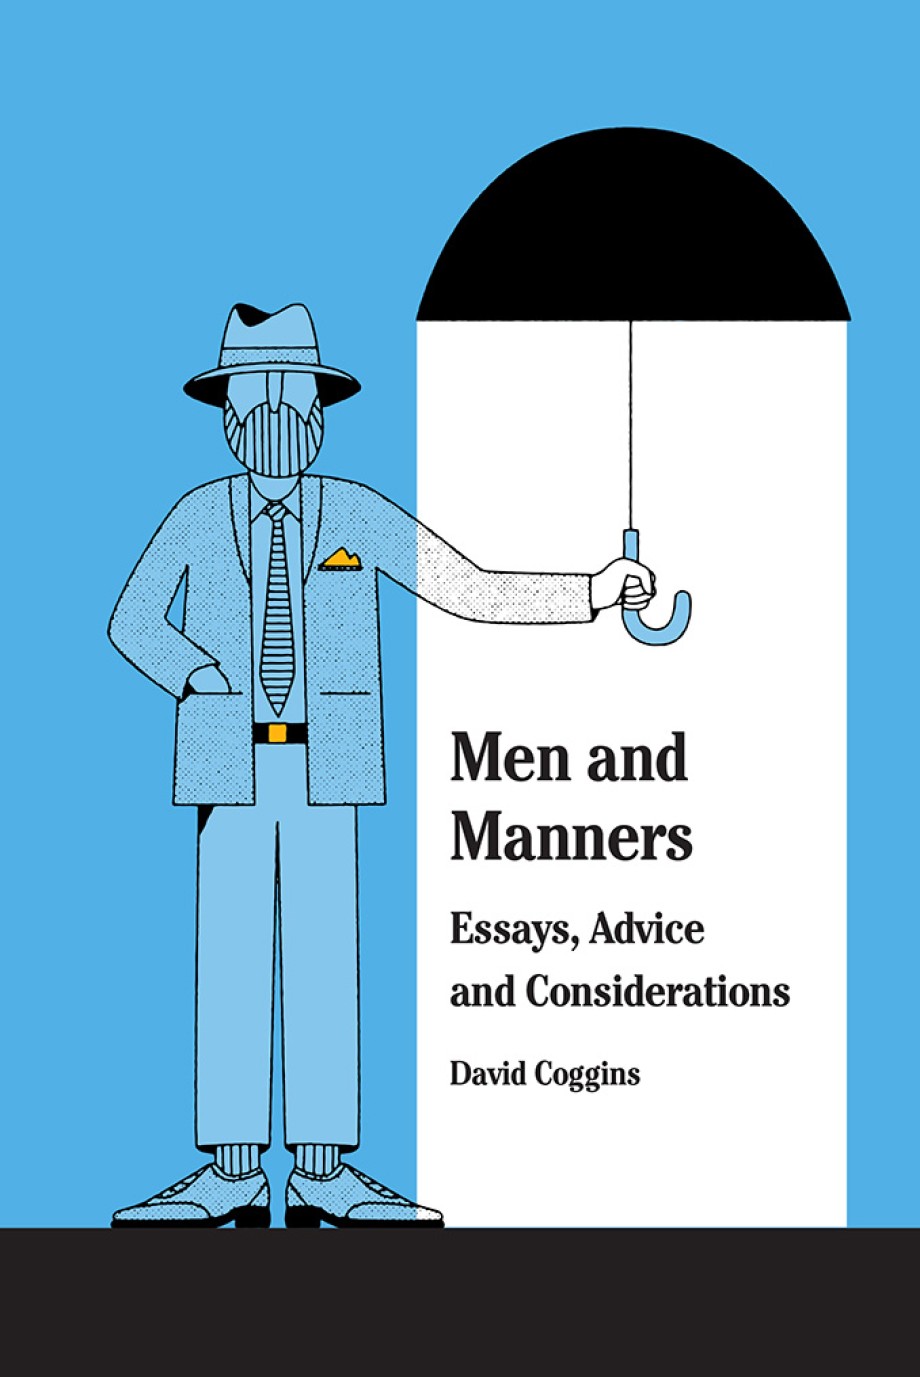 Men and Manners Essays, Advice and Considerations